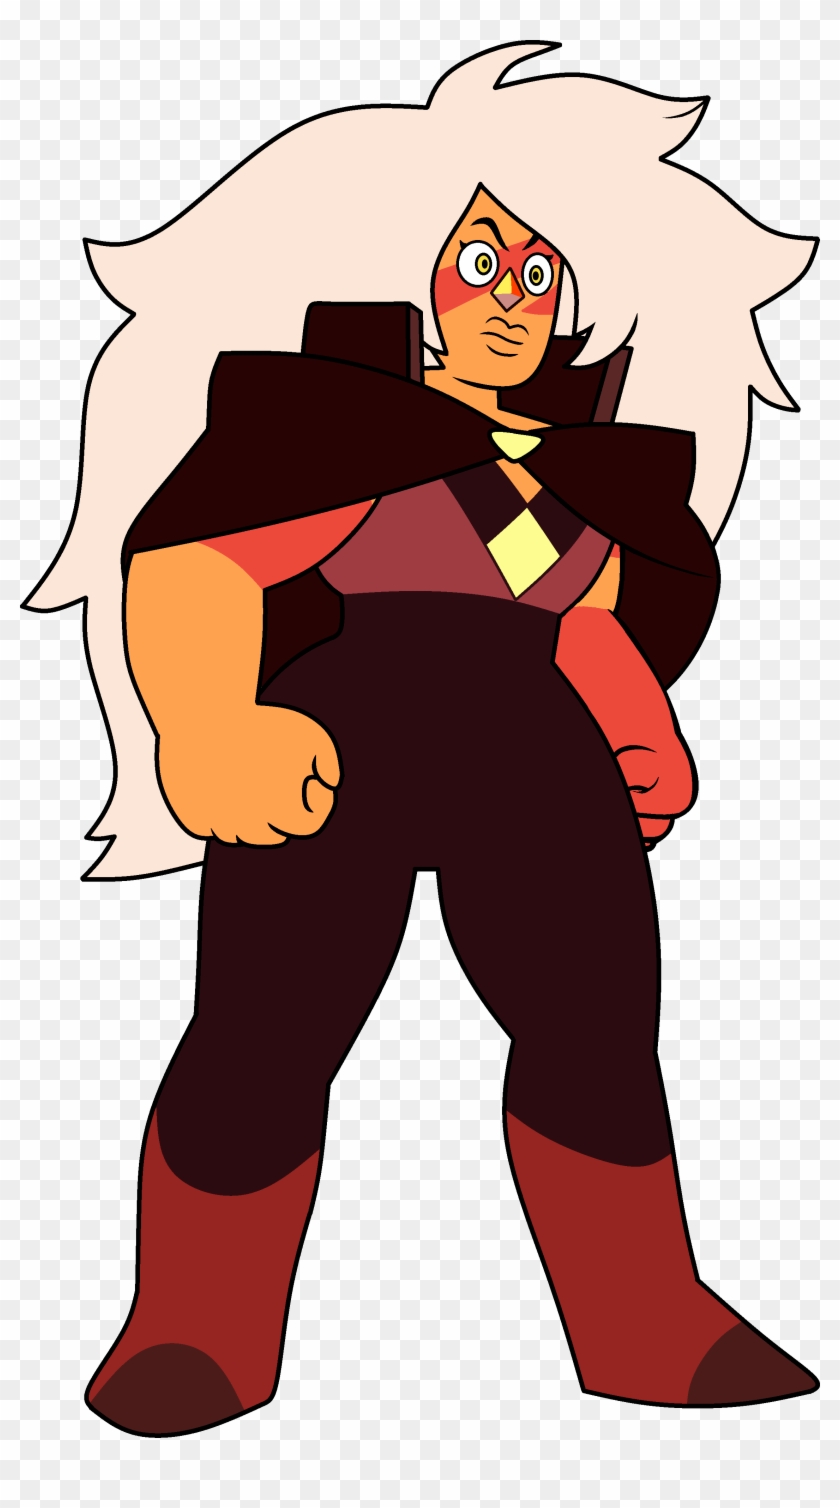 My Current Plants For Armours Are - Steven Universe Jasper Crystal Gem #1243608